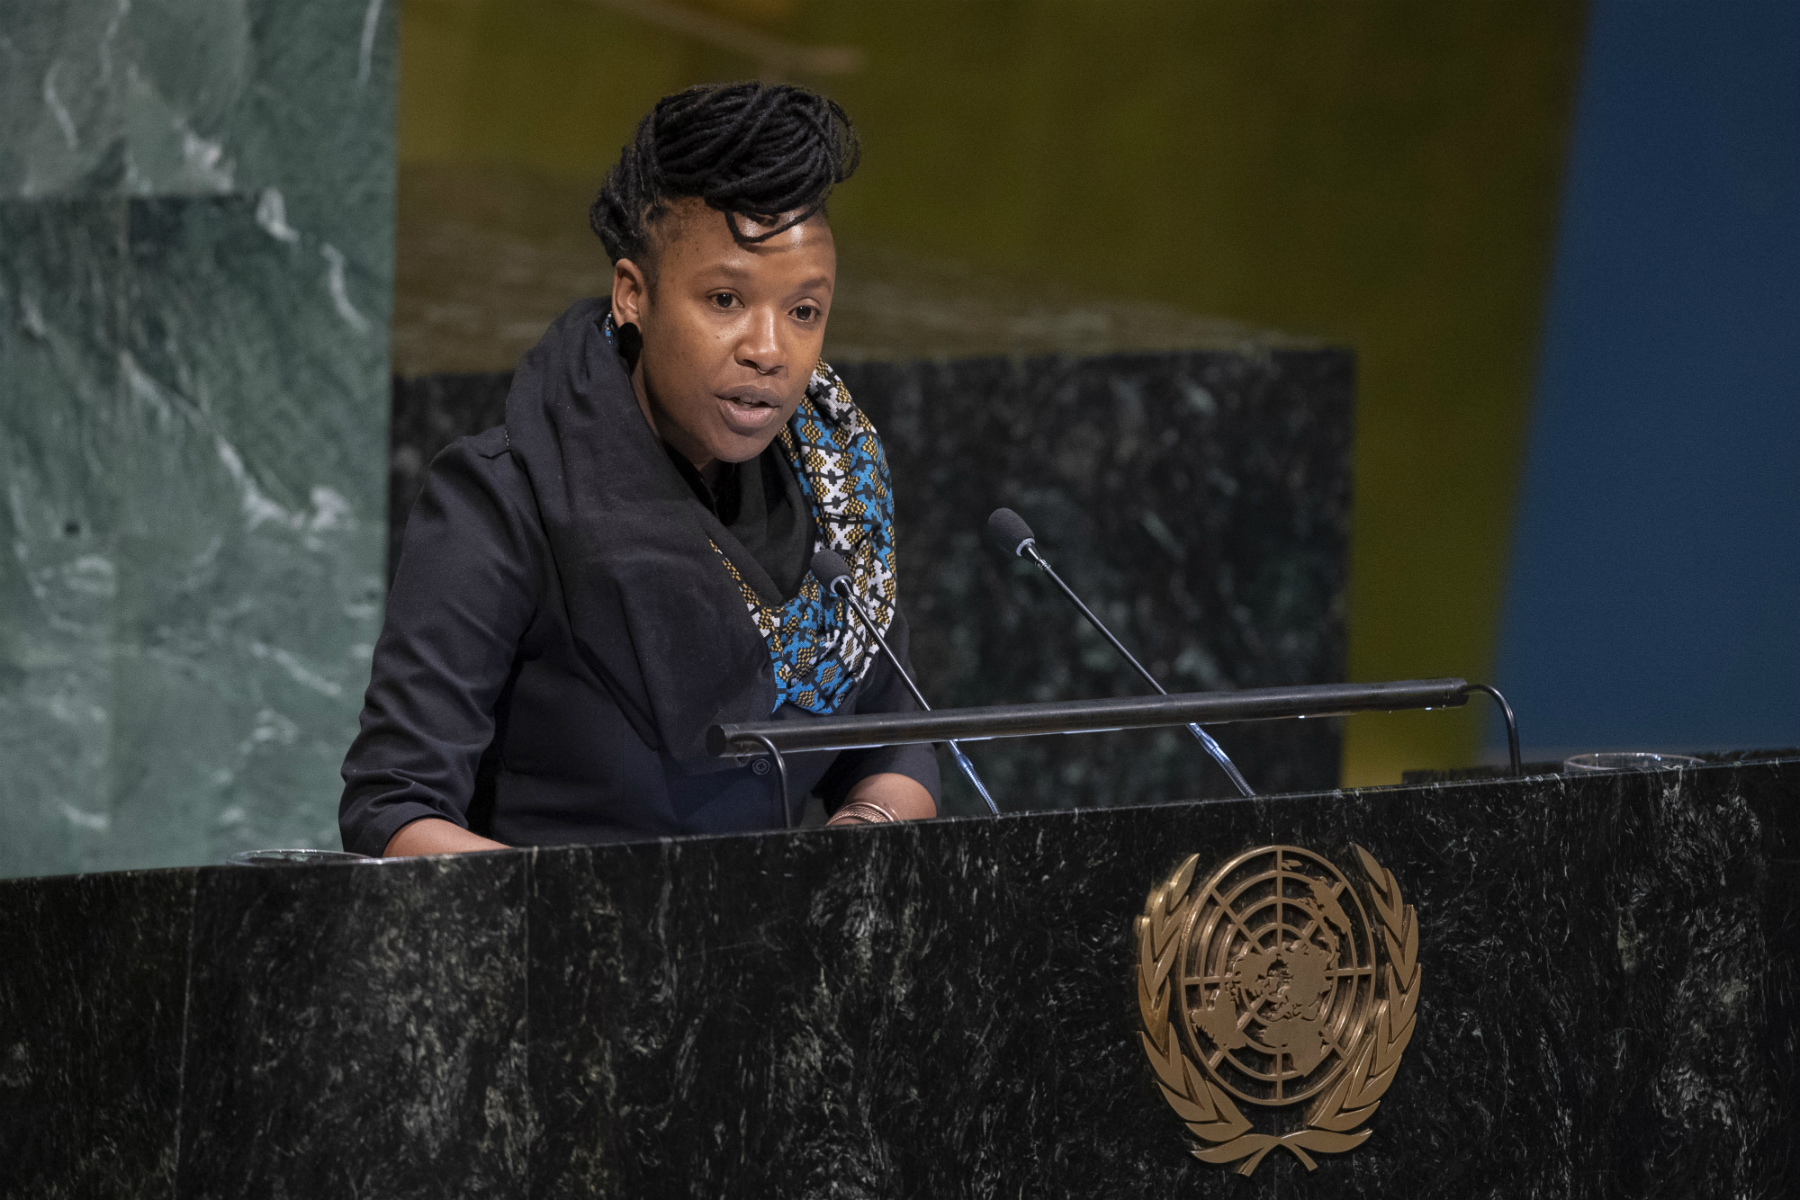 UN rapporteur on racism and racial discrimination Tendayi Achiume at the United Nations in New York